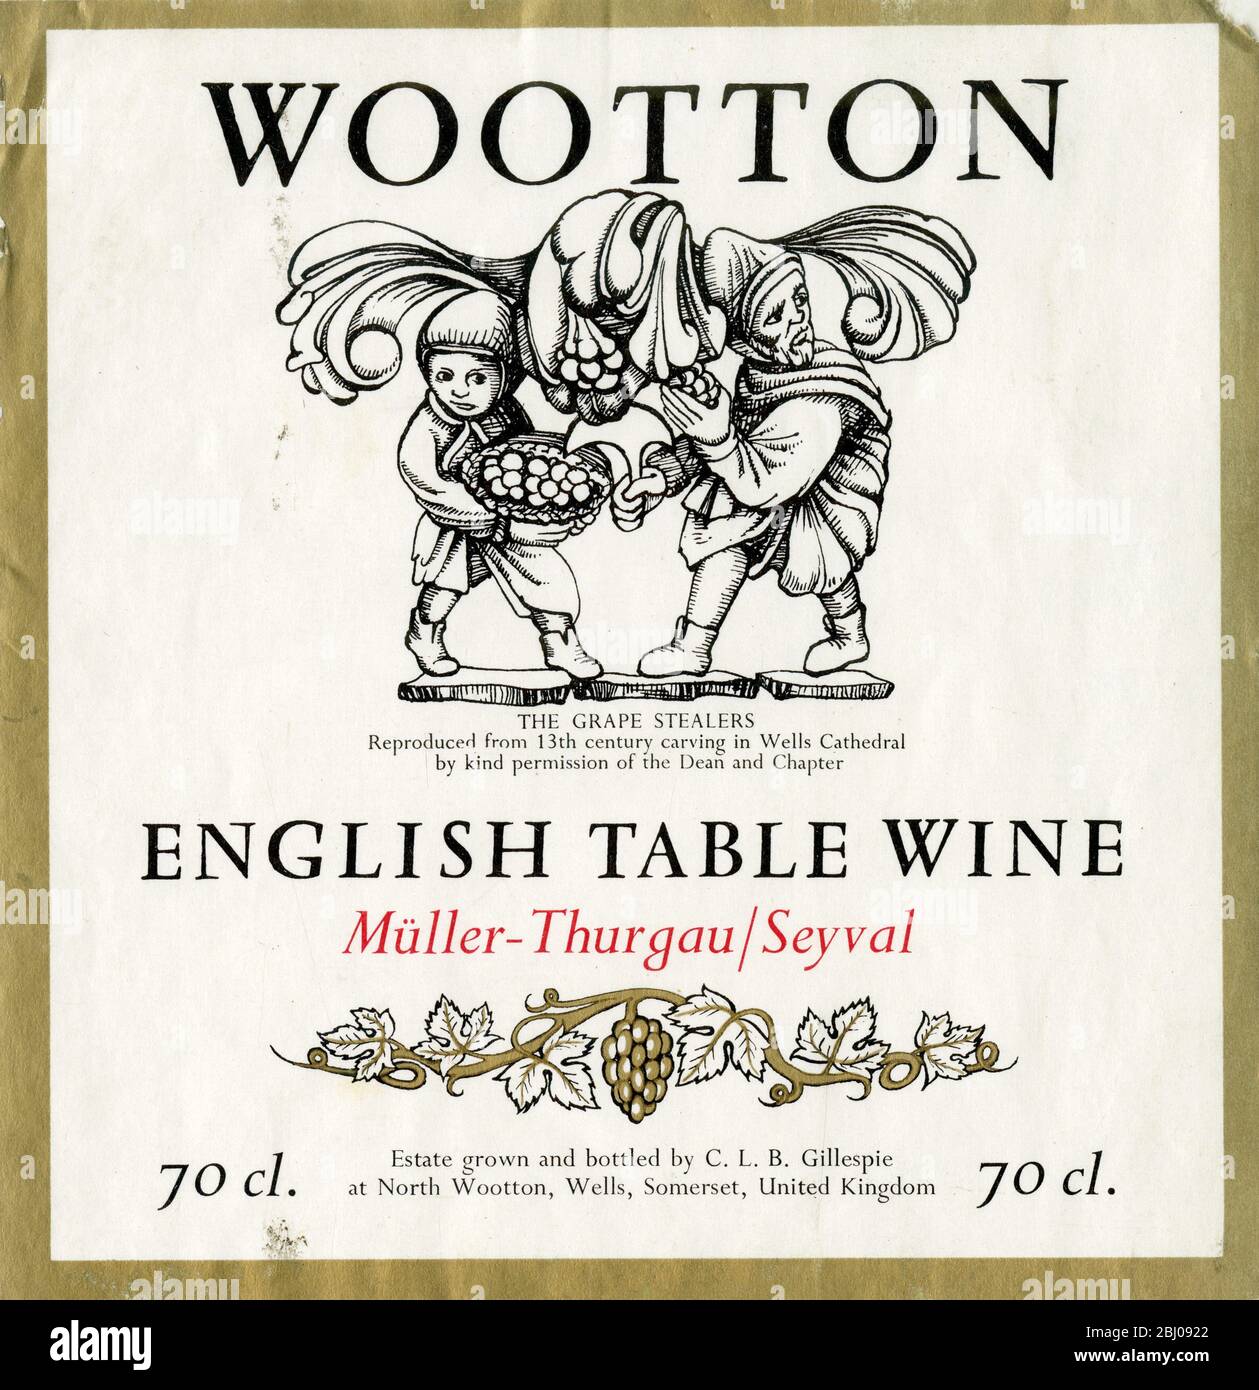 Wine Label - Wootton English Table Wine. A Muller-Thurgau/Seyval vine variety. Produced by Major and Mrs C.L.B.Gillespie at North Wootton, Somerset. Stock Photo